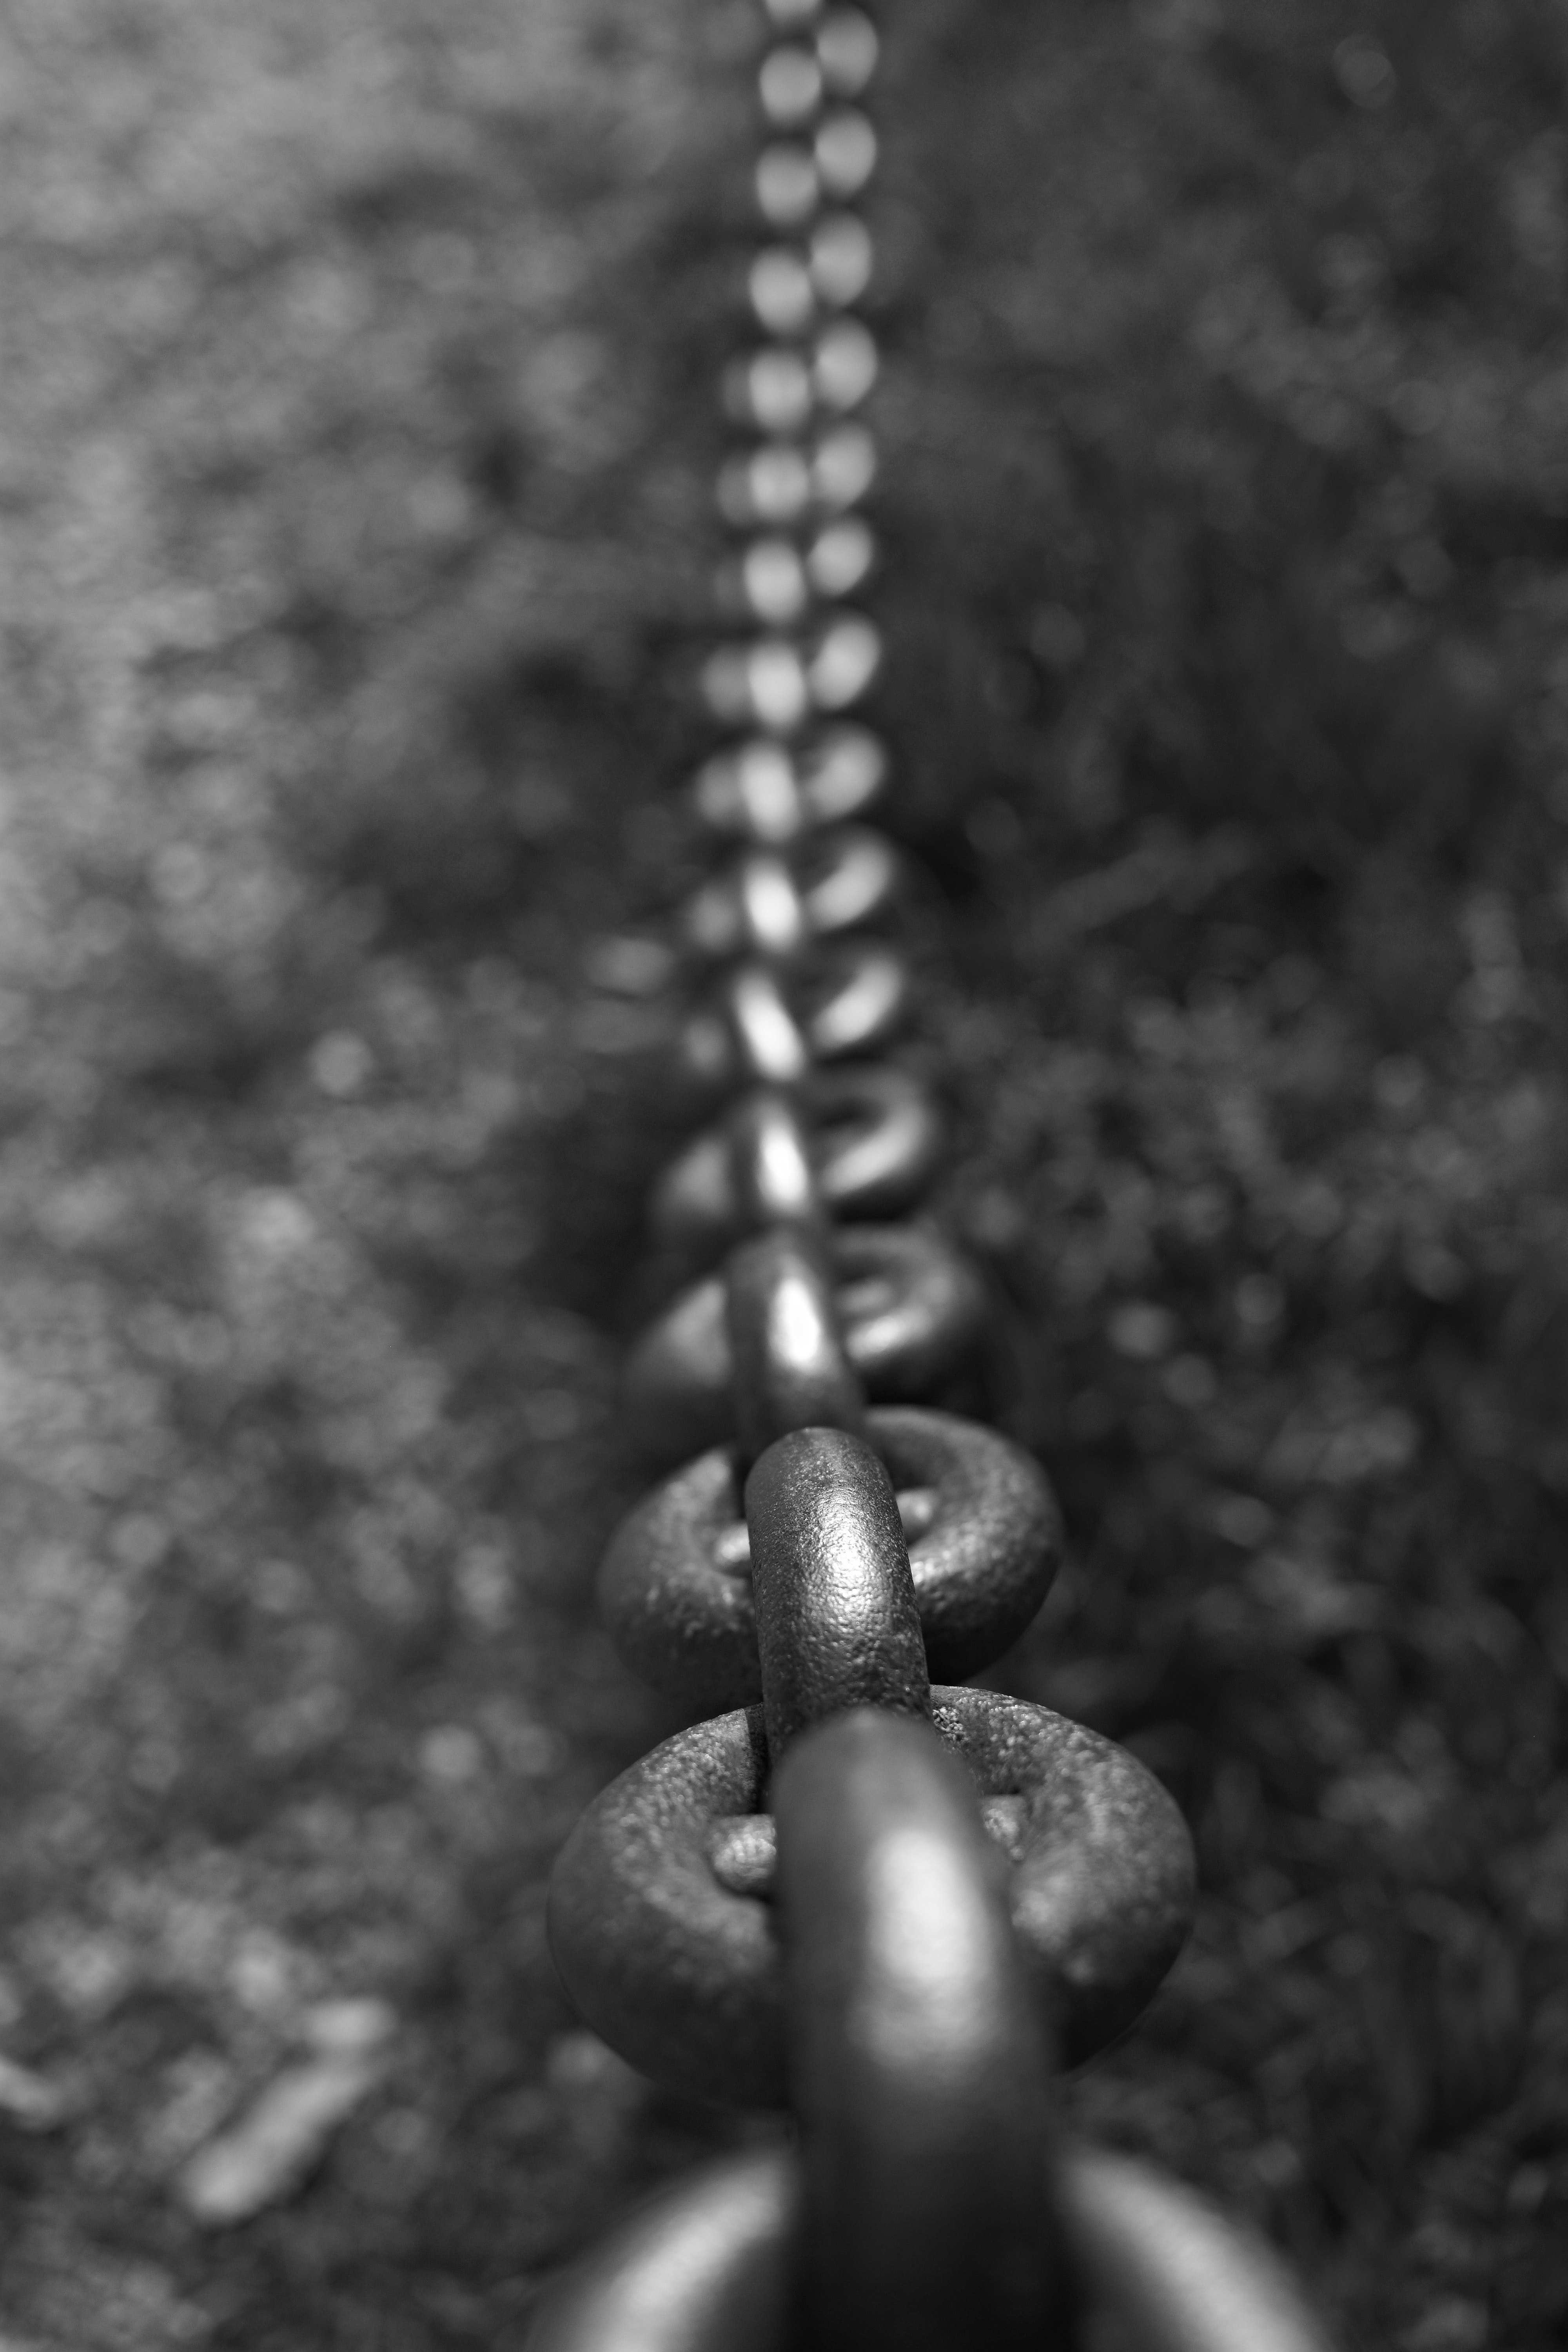 Metal Chain in Grayscale and Closeup Photo · Free Stock Photo